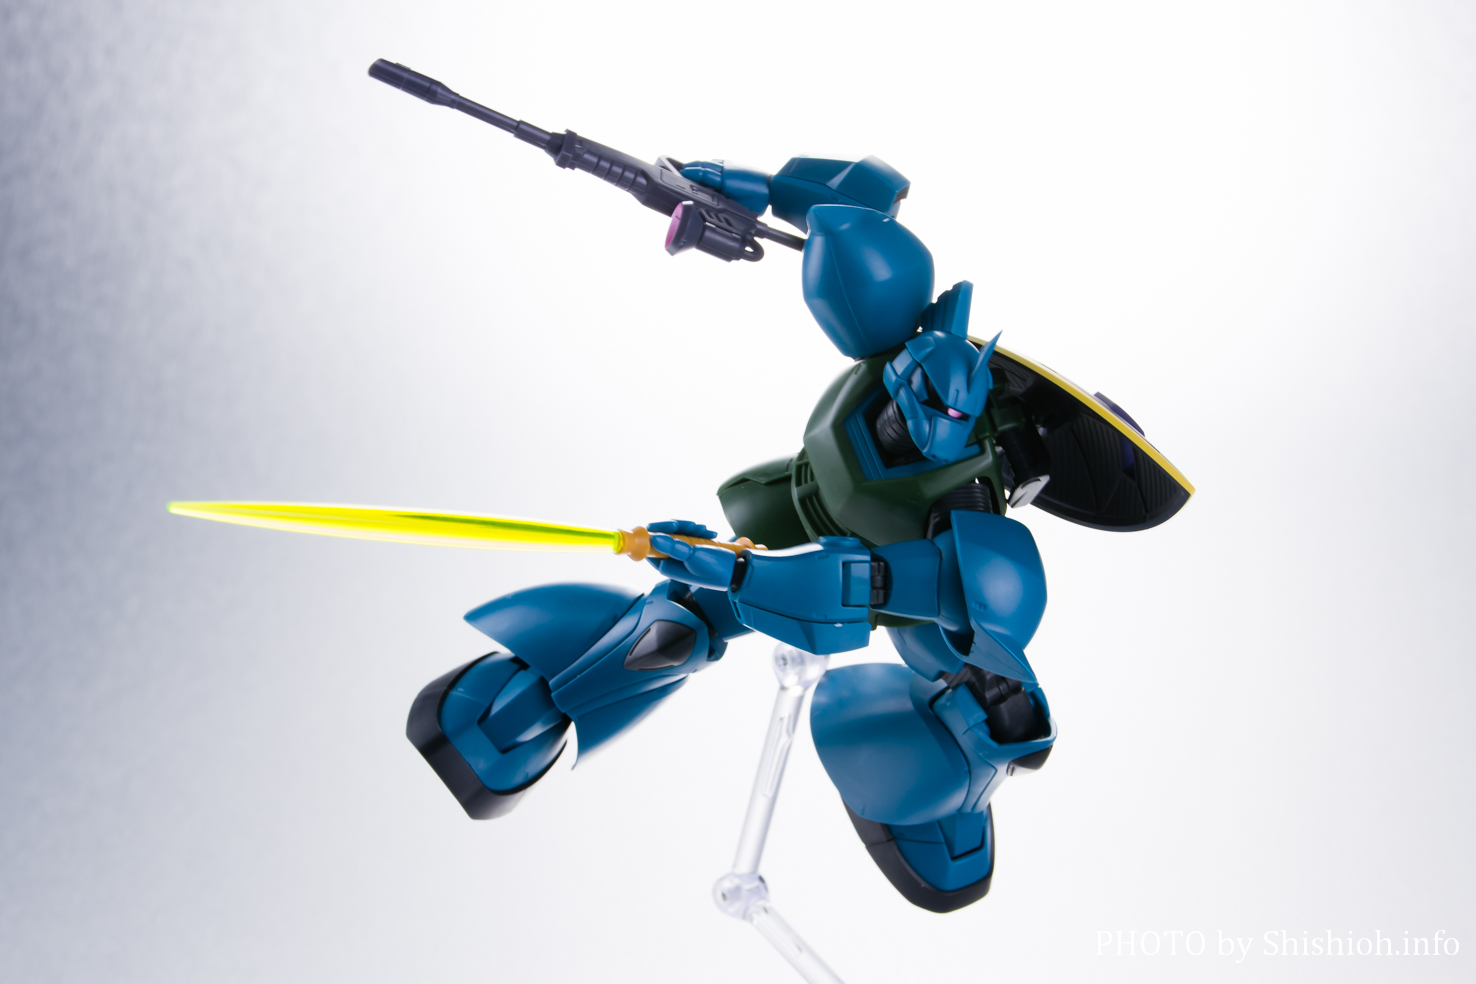 ROBOT魂 ＜SIDE MS＞ MS-14A ガトー専用ゲルググ ver. A.N.I.M.E.